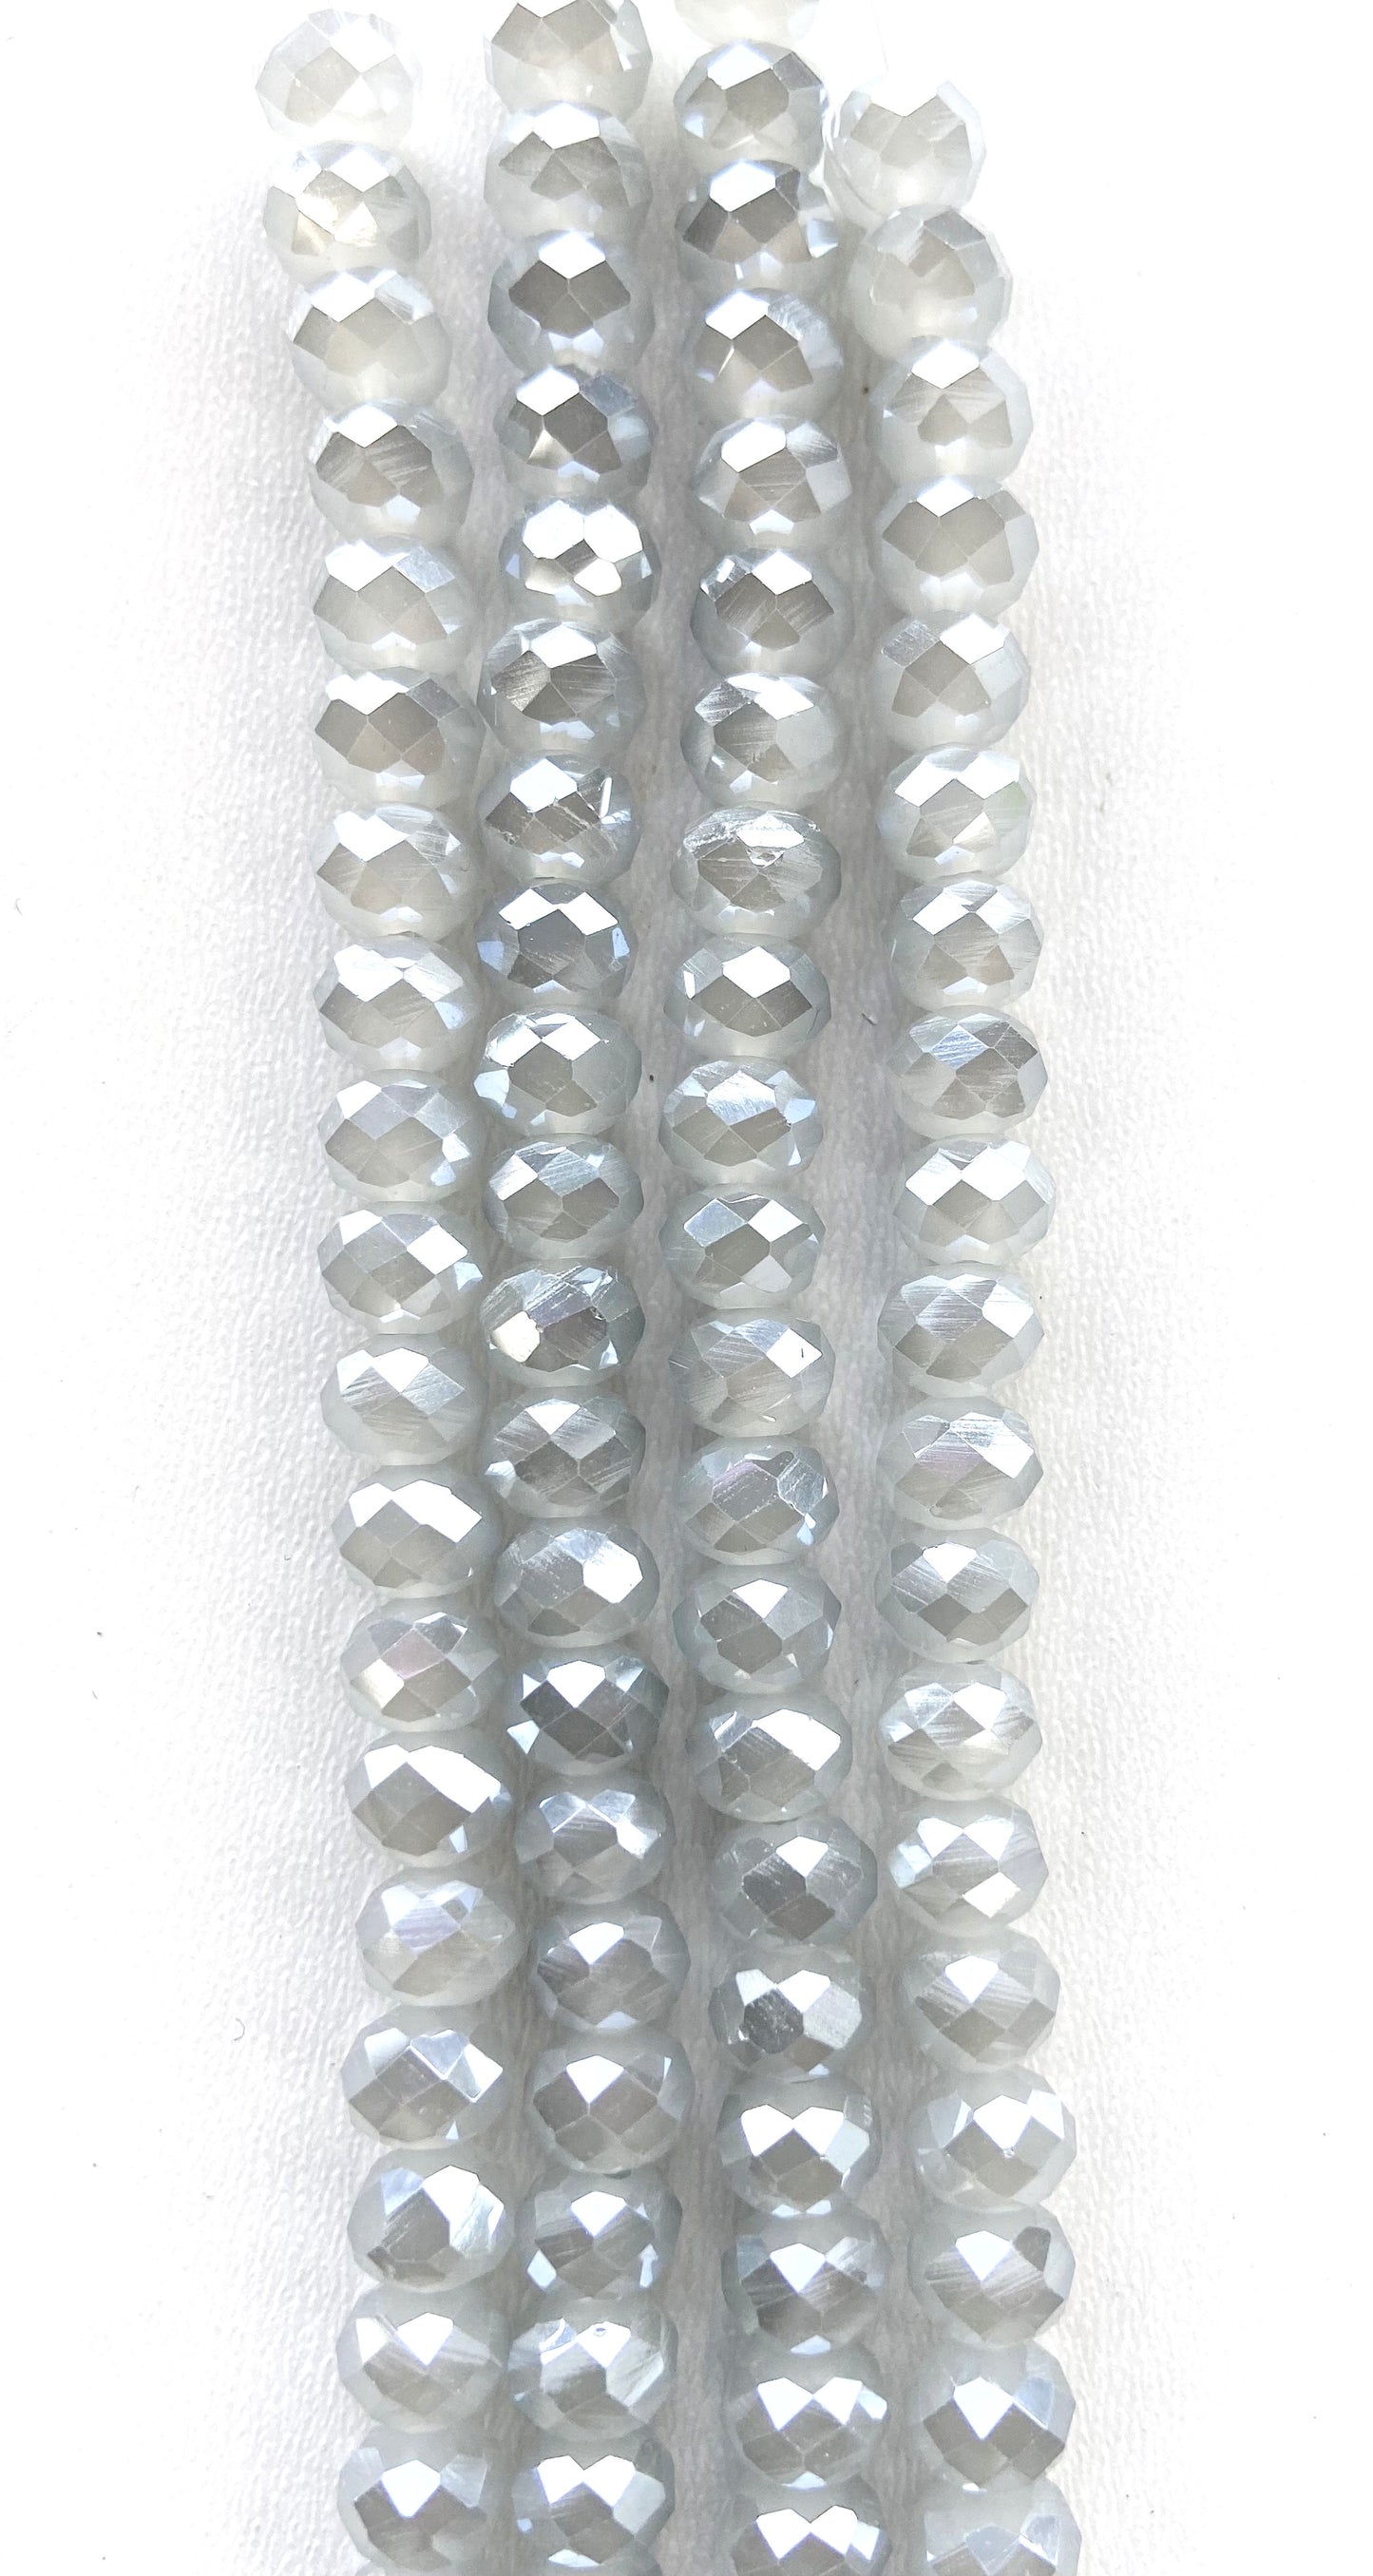 Rondell Glass Beads Grey Lustre 8mm